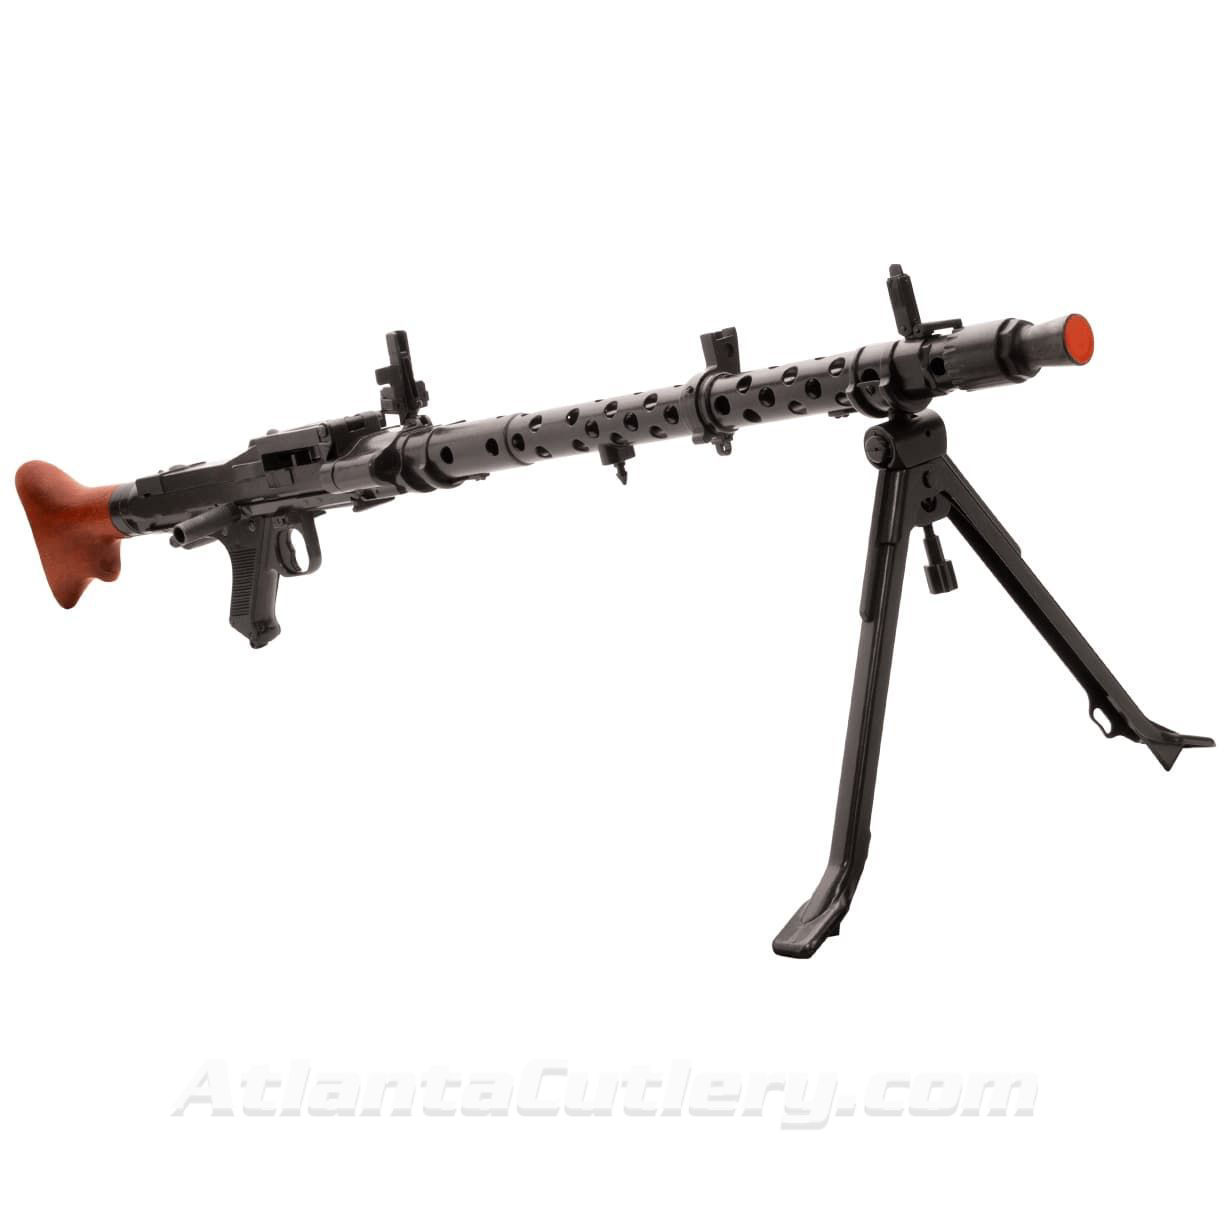 metal, wood and plastic reproduction Maschinengewehr 34 with simulating loading and firing mechanism, and mobile bipod